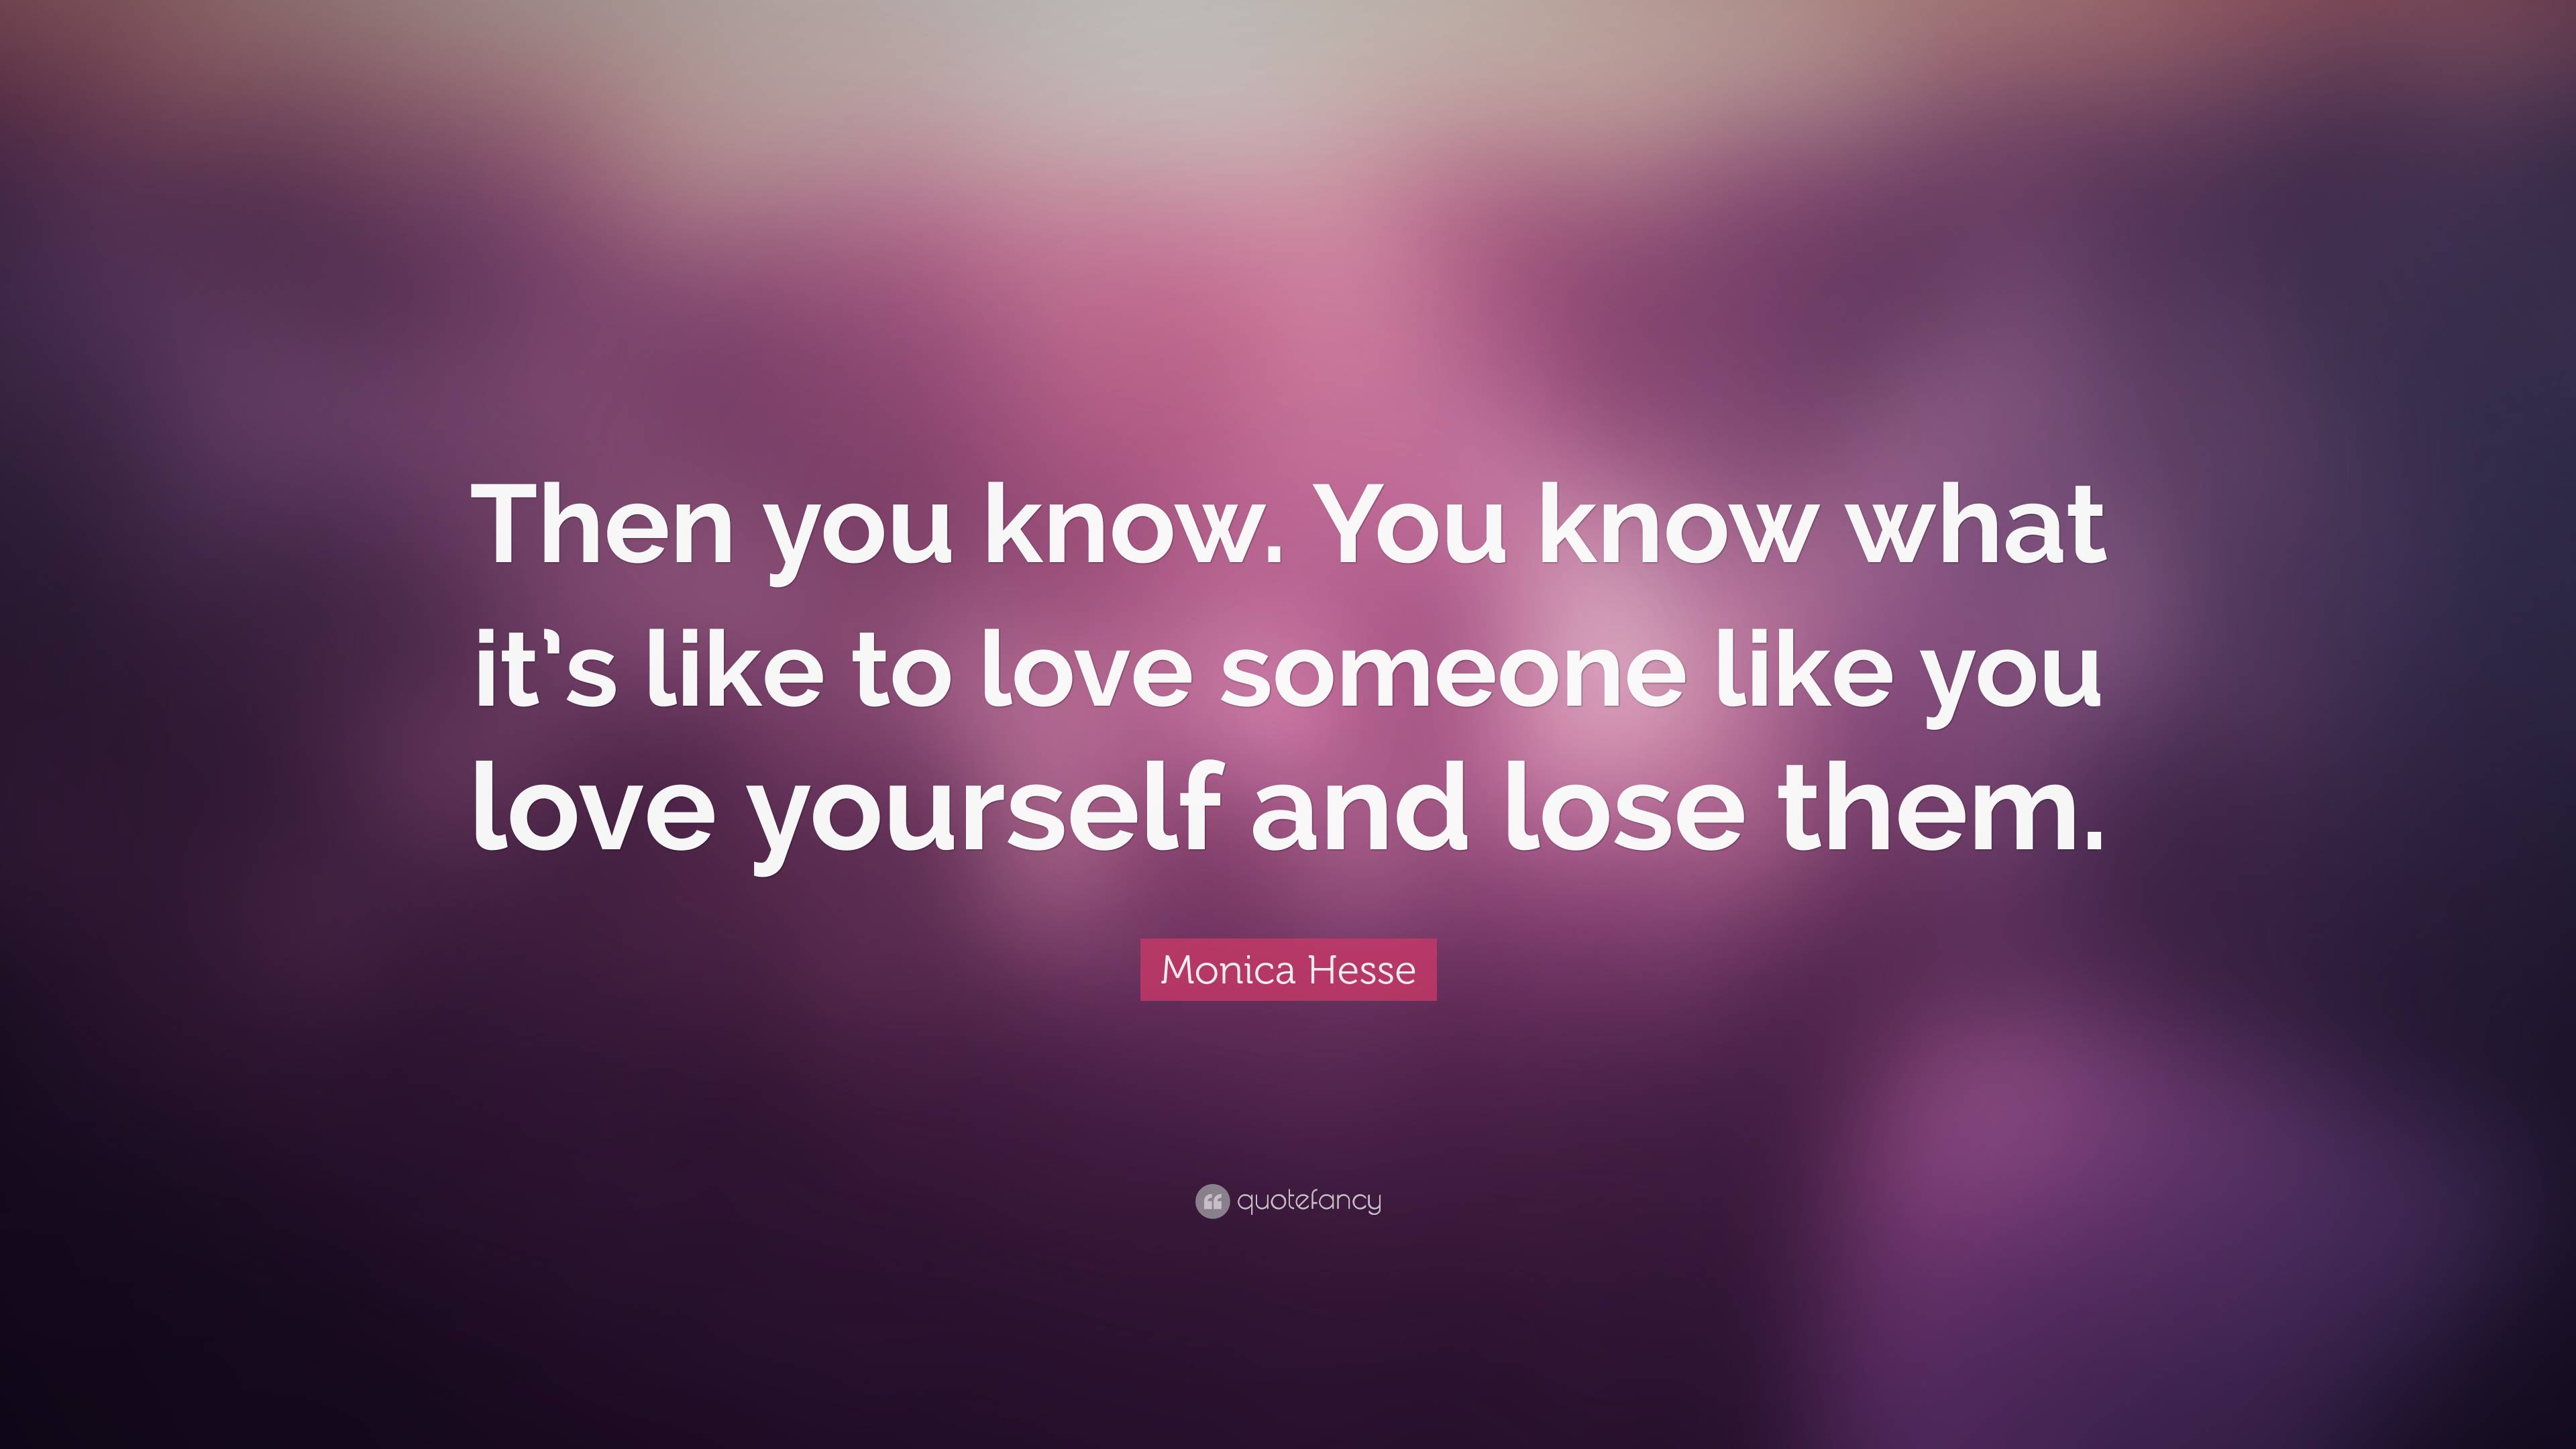 Monica Hesse Quote: “Then you know. You know what it's like to love someone  like you